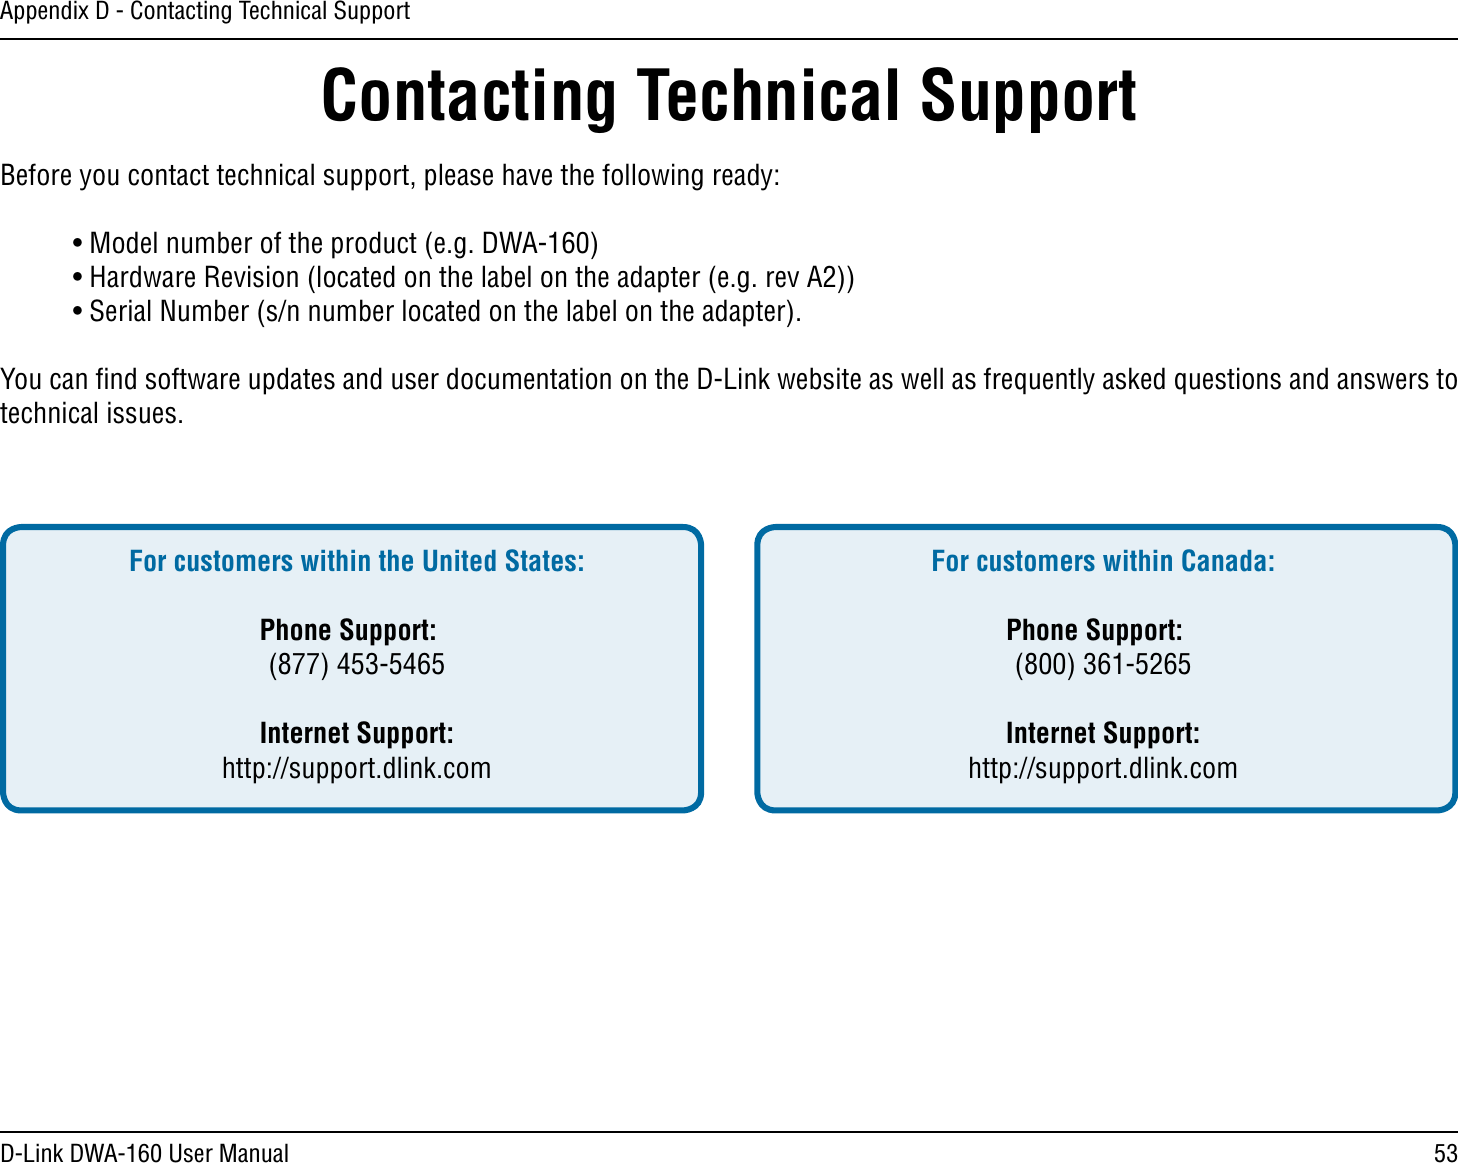 53D-Link DWA-160 User ManualAppendix D - Contacting Technical SupportContacting Technical SupportBefore you contact technical support, please have the following ready: s-ODELNUMBEROFTHEPRODUCTEG$7! s(ARDWARE2EVISIONLOCATEDONTHELABELONTHEADAPTEREGREV! s3ERIAL.UMBERSNNUMBERLOCATEDONTHELABELONTHEADAPTER9OUCANlNDSOFTWAREUPDATESANDUSERDOCUMENTATIONONTHE$,INKWEBSITEASWELLASFREQUENTLYASKEDQUESTIONSANDANSWERSTOtechnical issues.For customers within the United States: Phone Support: (877) 453-5465 Internet Support: http://support.dlink.com For customers within Canada: Phone Support: (800) 361-5265   Internet Support: http://support.dlink.com 